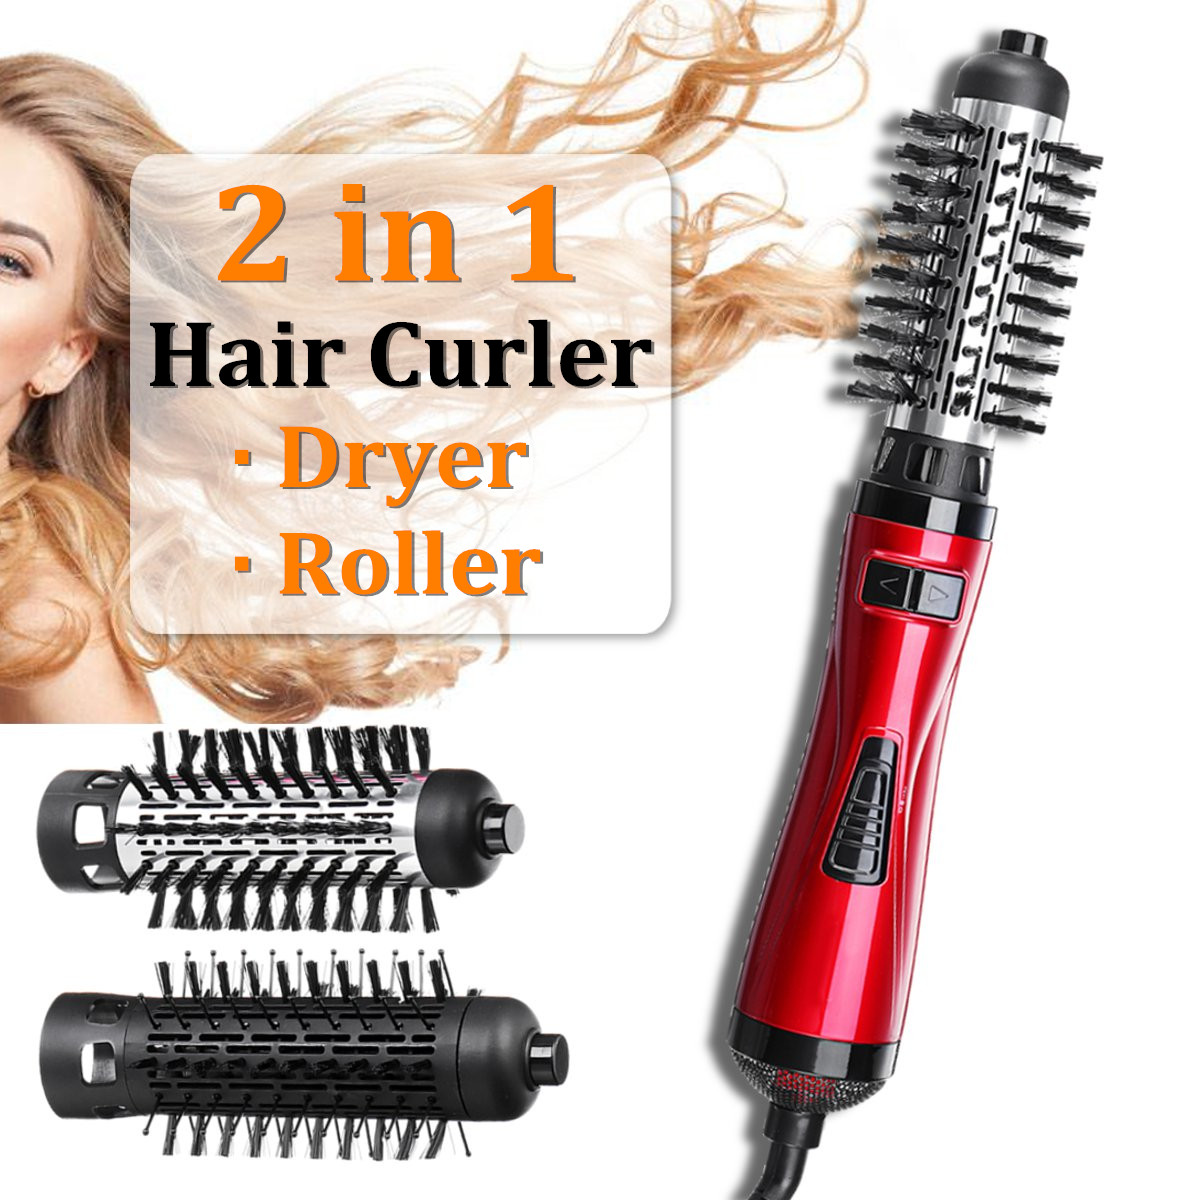 

2 in 1 Hair Curler Brush Auto Hot Salon Styling Rod Dryer Roller Rotating Wand